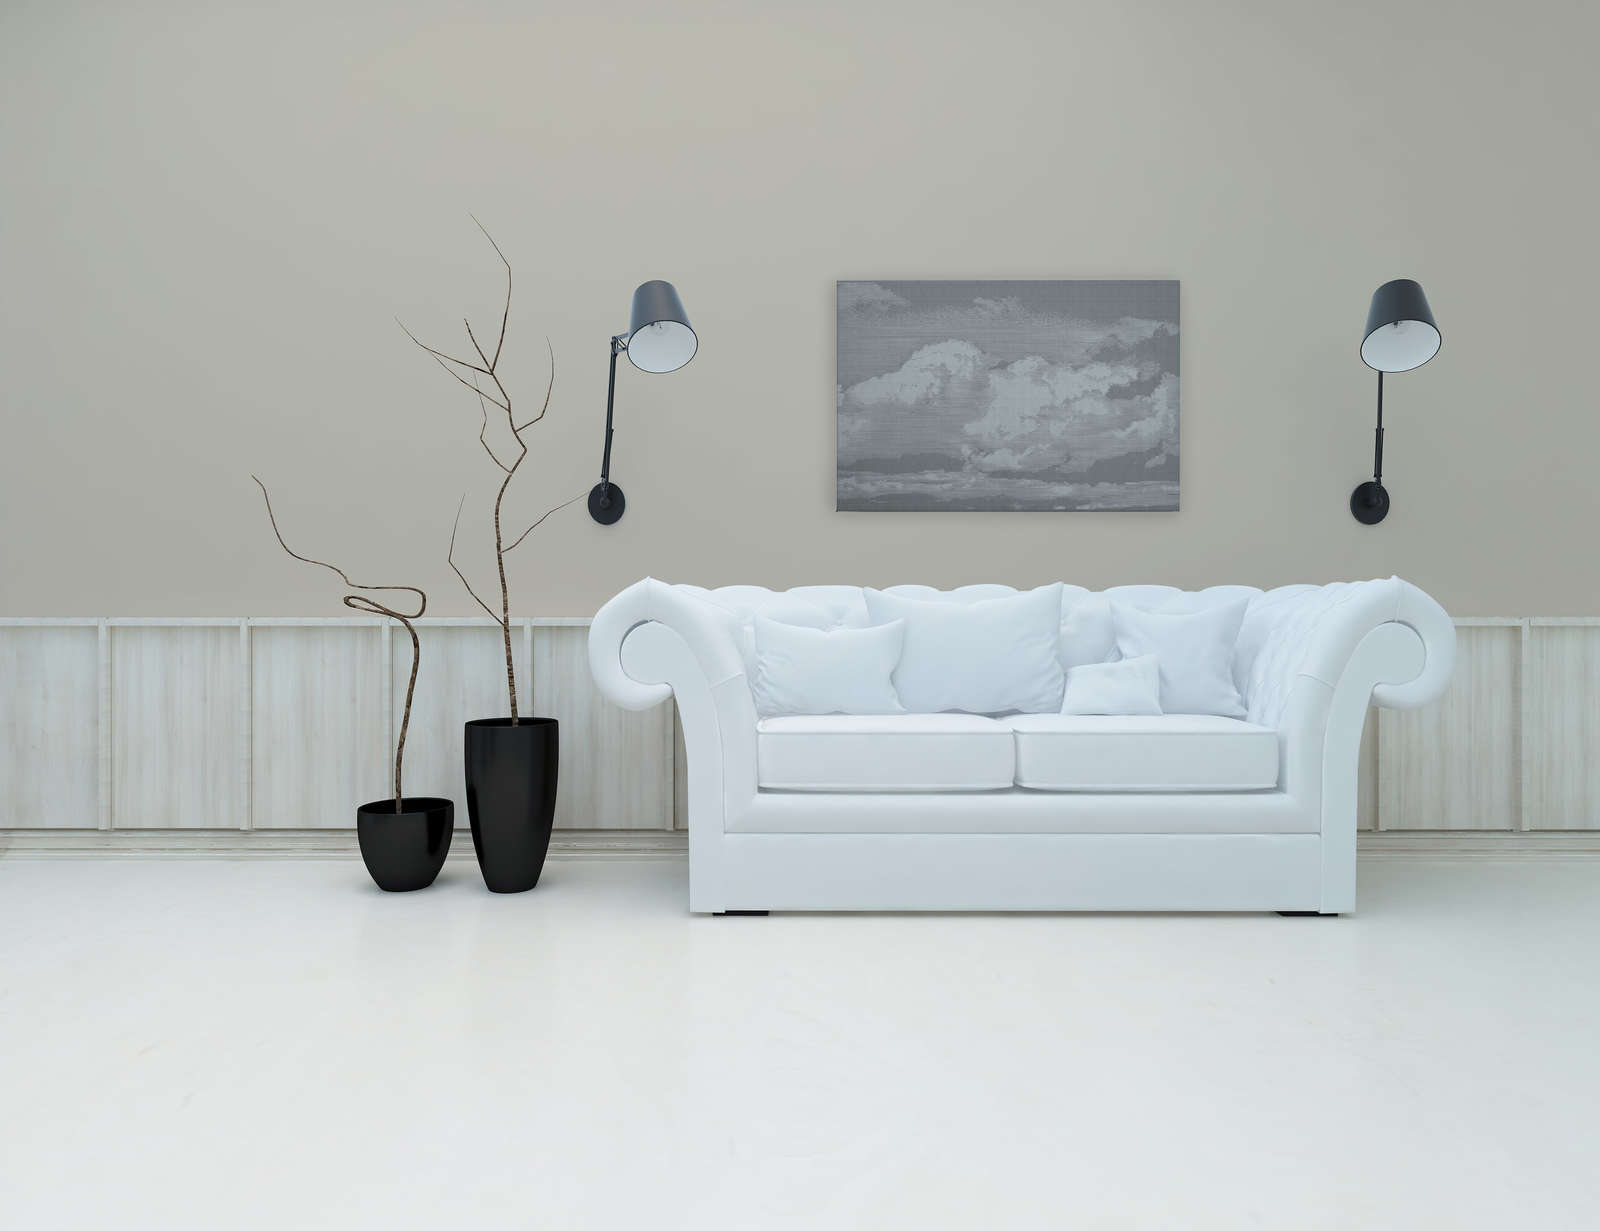             Clouds 2 - Heavenly canvas picture in natural linen look with cloud motif - 0.90 m x 0.60 m
        